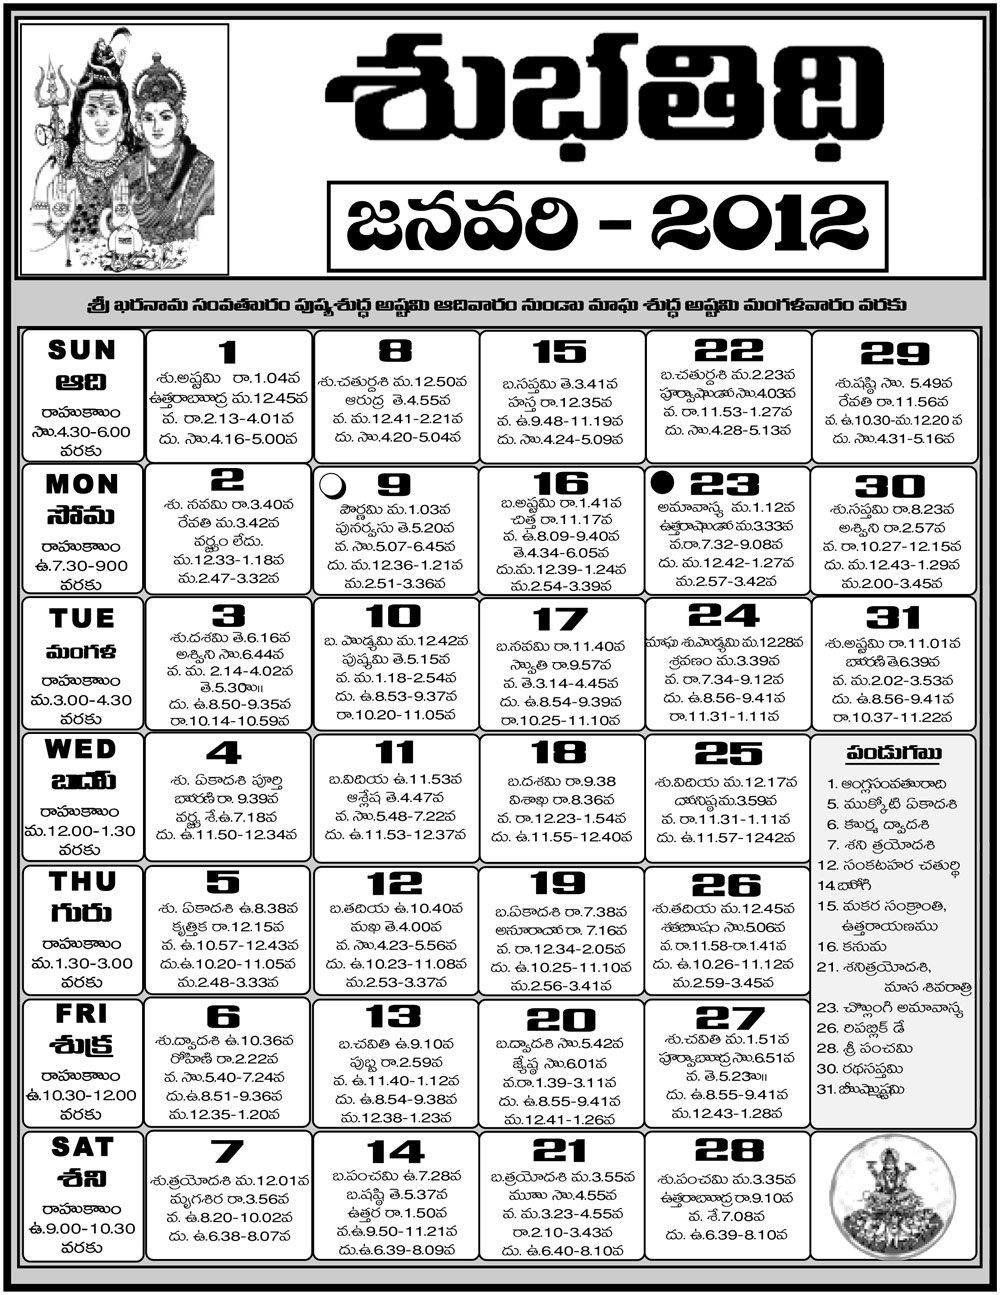 Telugu Calendar 2012 | Telugu Calendar 2011 | Telugu Calendar 2010 with 2002 Calendar Of October With Tithi